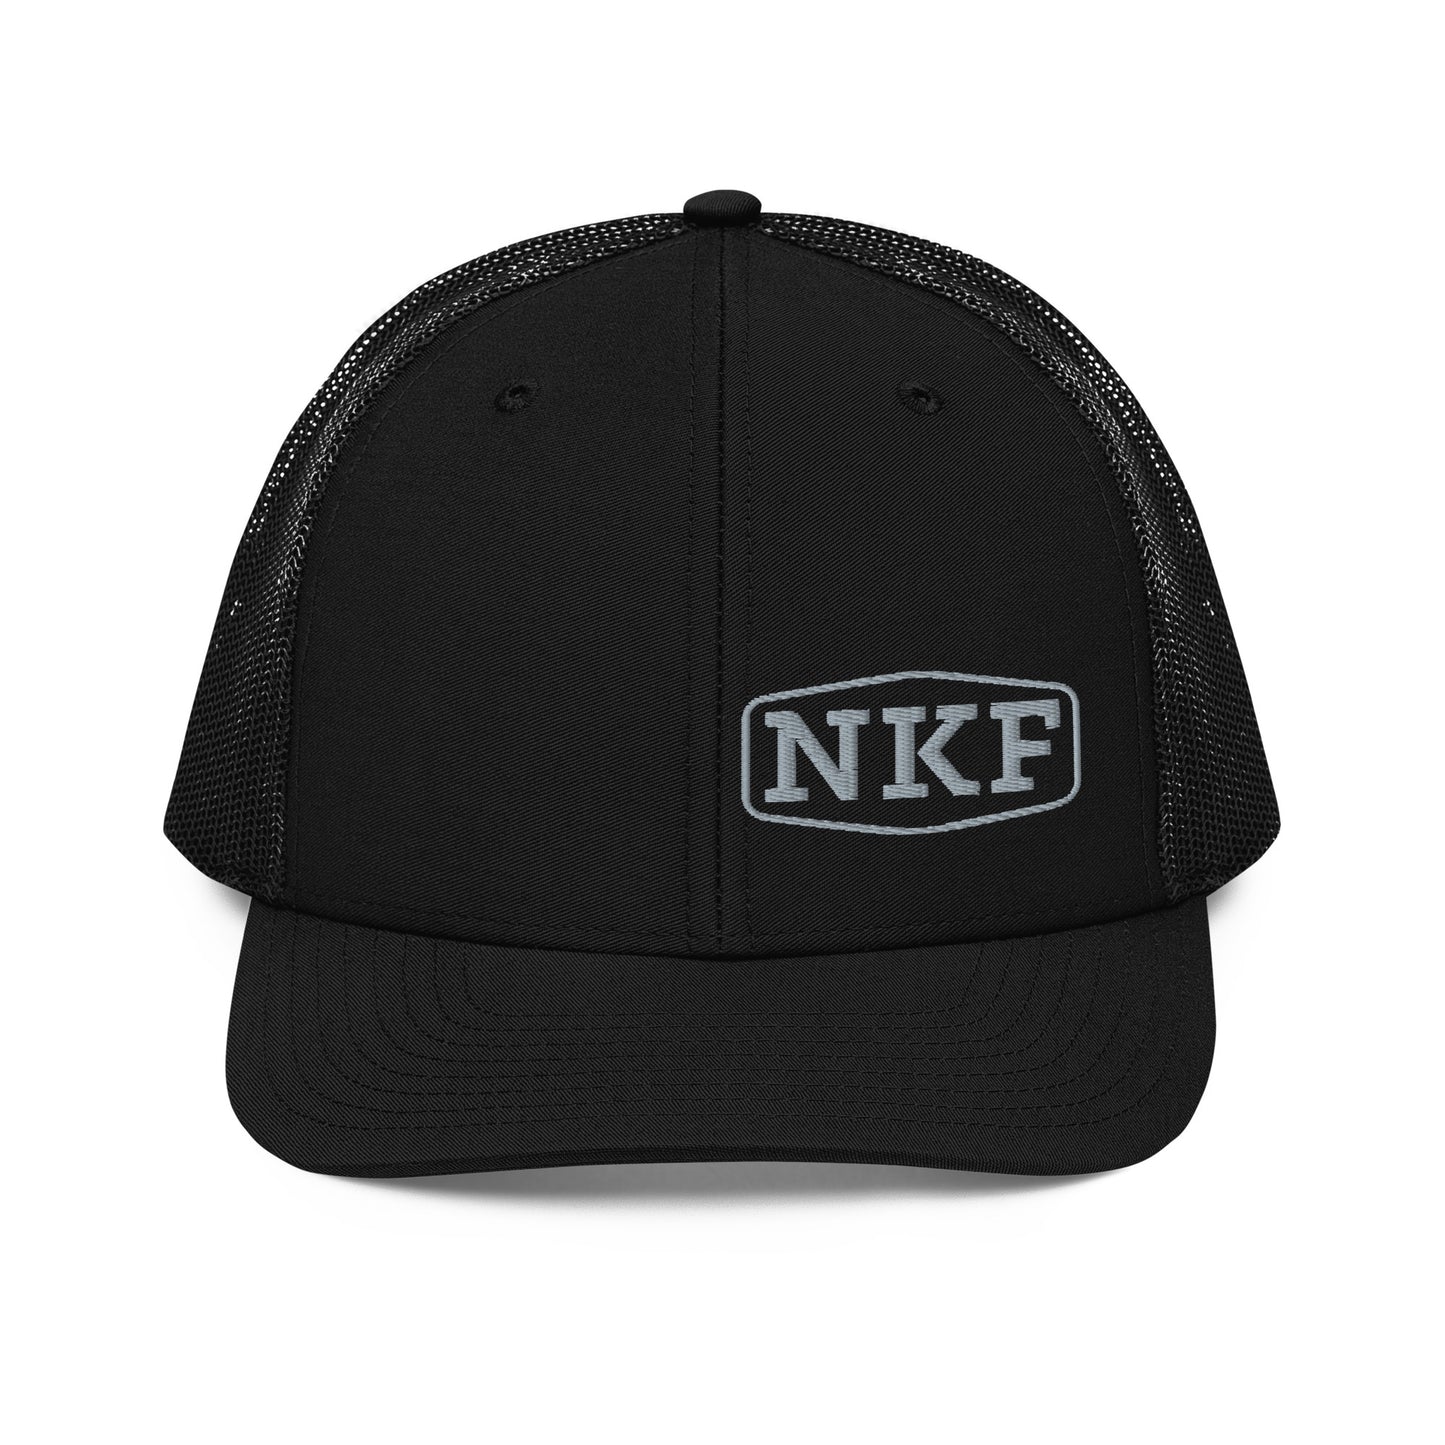 NKF Hat with Grey Embroidery